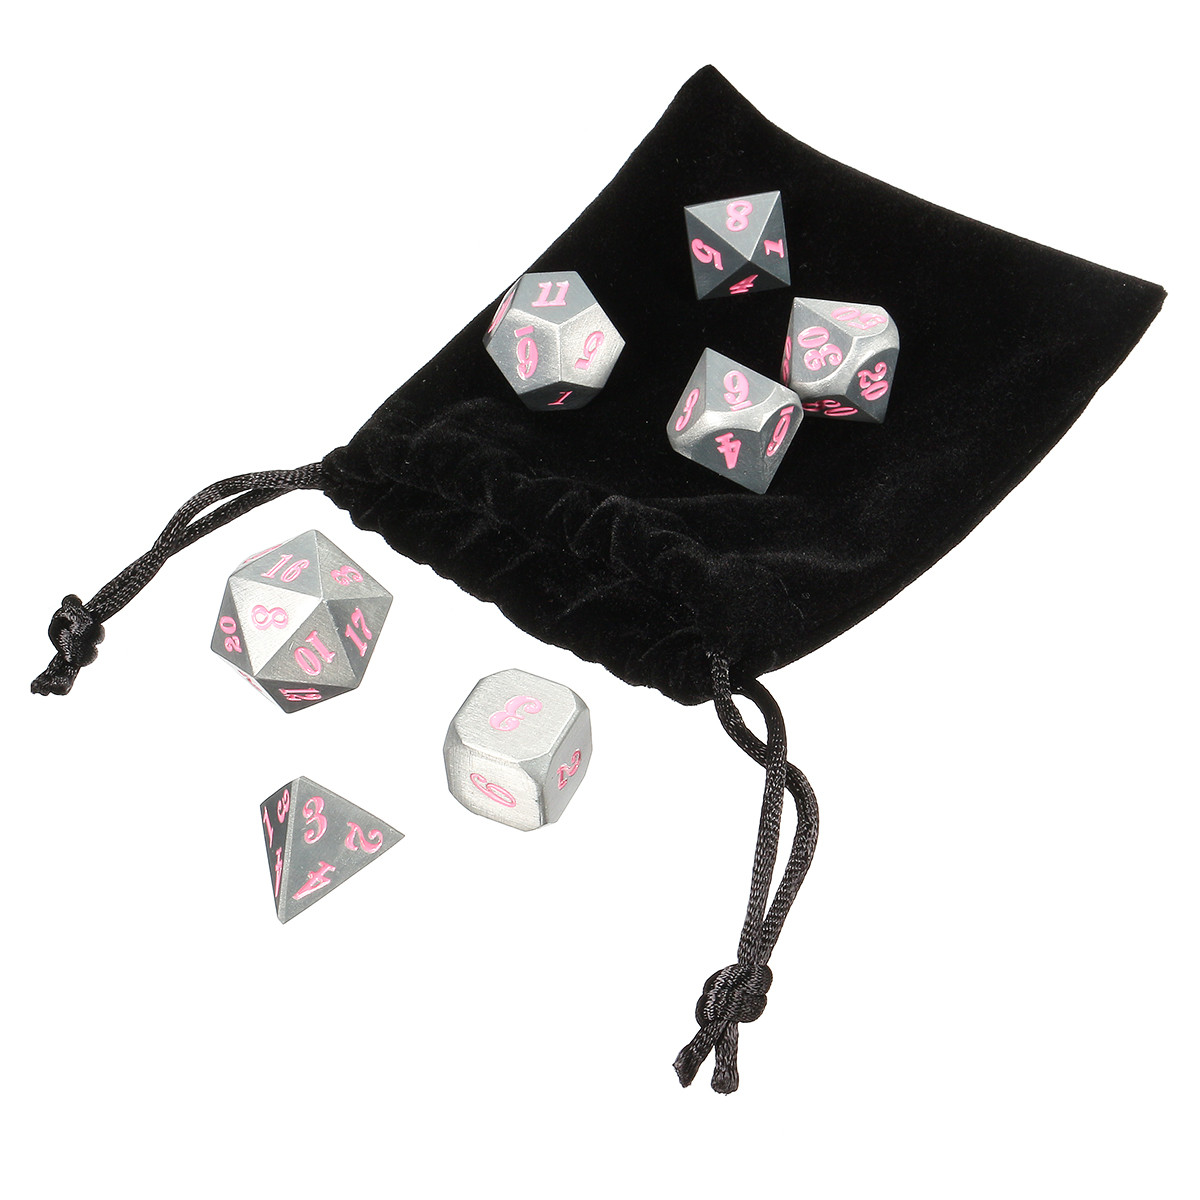 7Pc-Solid-Metal-Heavy-Dice-Set-Polyhedral-Dices-Role-Playing-Games-Dice-Gadget-RPG-1391316-7